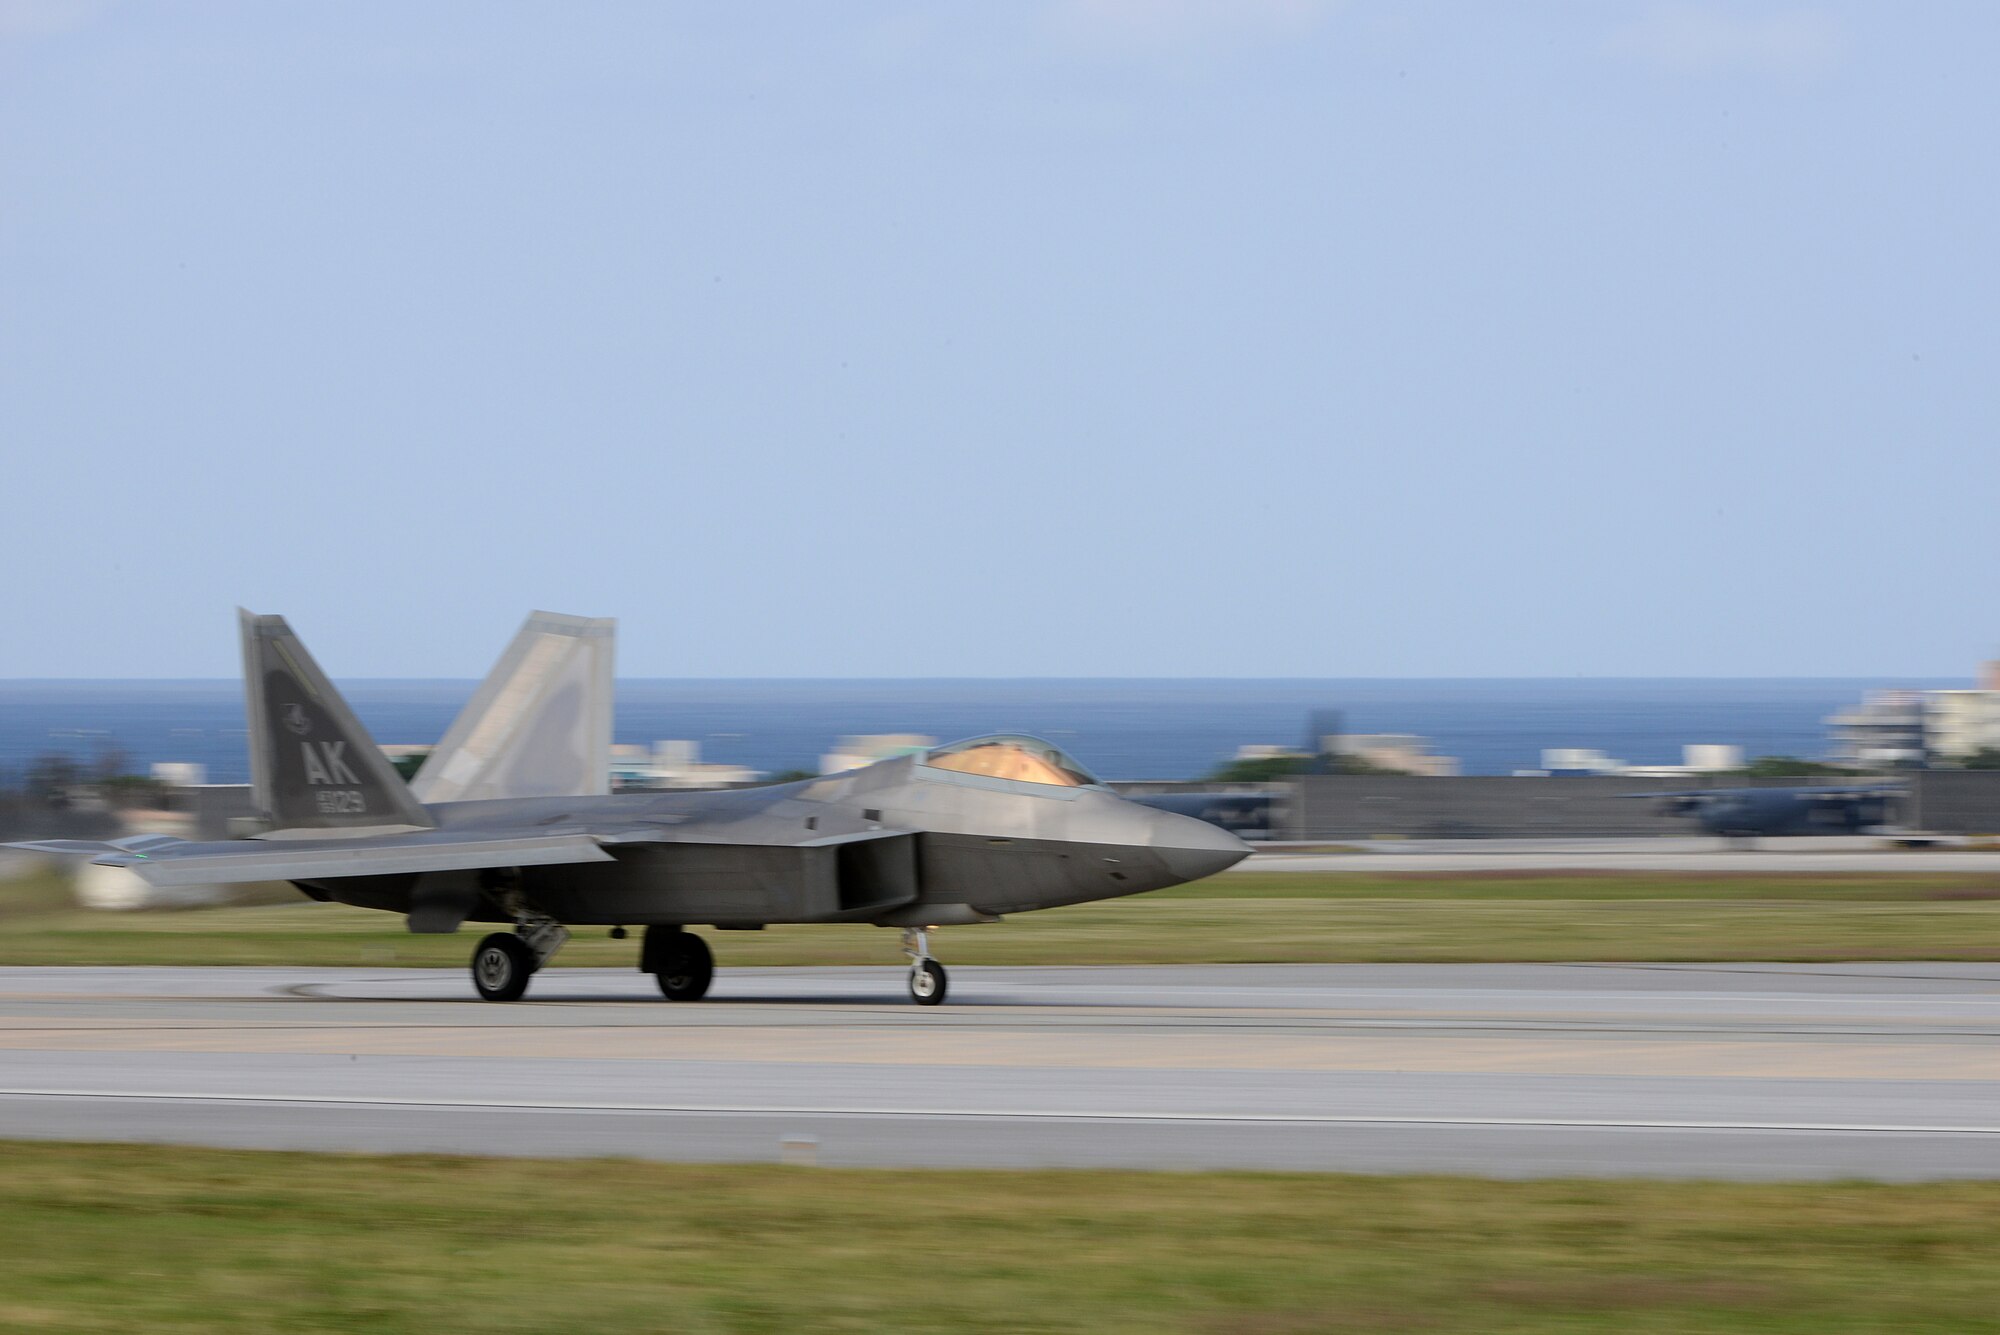 A U.S. Air Force F-22 Raptor from the 525th Fighter Squadron stationed at Joint Base Elmendorf-Richardson, Alaska, lands on the Kadena Air Base, Japan, runway during Keen Sword 2015 Nov. 14, 2014. Keen Sword is a regularly scheduled exercise which strengthens Japan-U.S. military interoperability and meets mutual defense objectives. Japan-U.S. military operations and exercises increase readiness to respond to varied crisis situations in the region. (U.S. Air Force photo by Senior Airman Maeson L. Elleman/Released) 